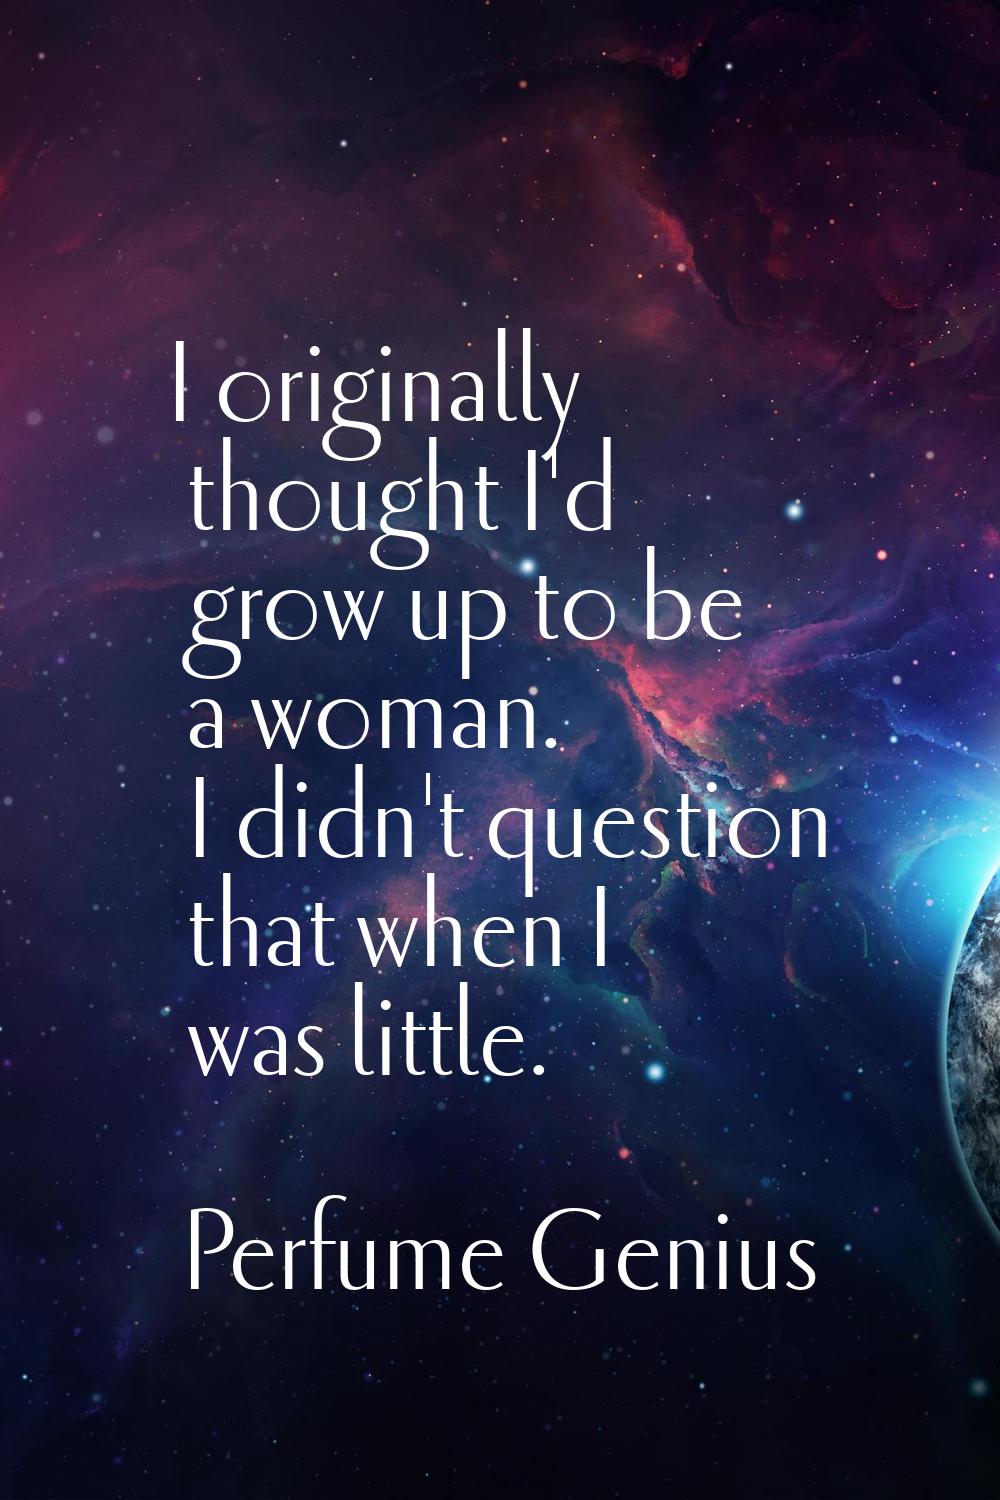 I originally thought I'd grow up to be a woman. I didn't question that when I was little.